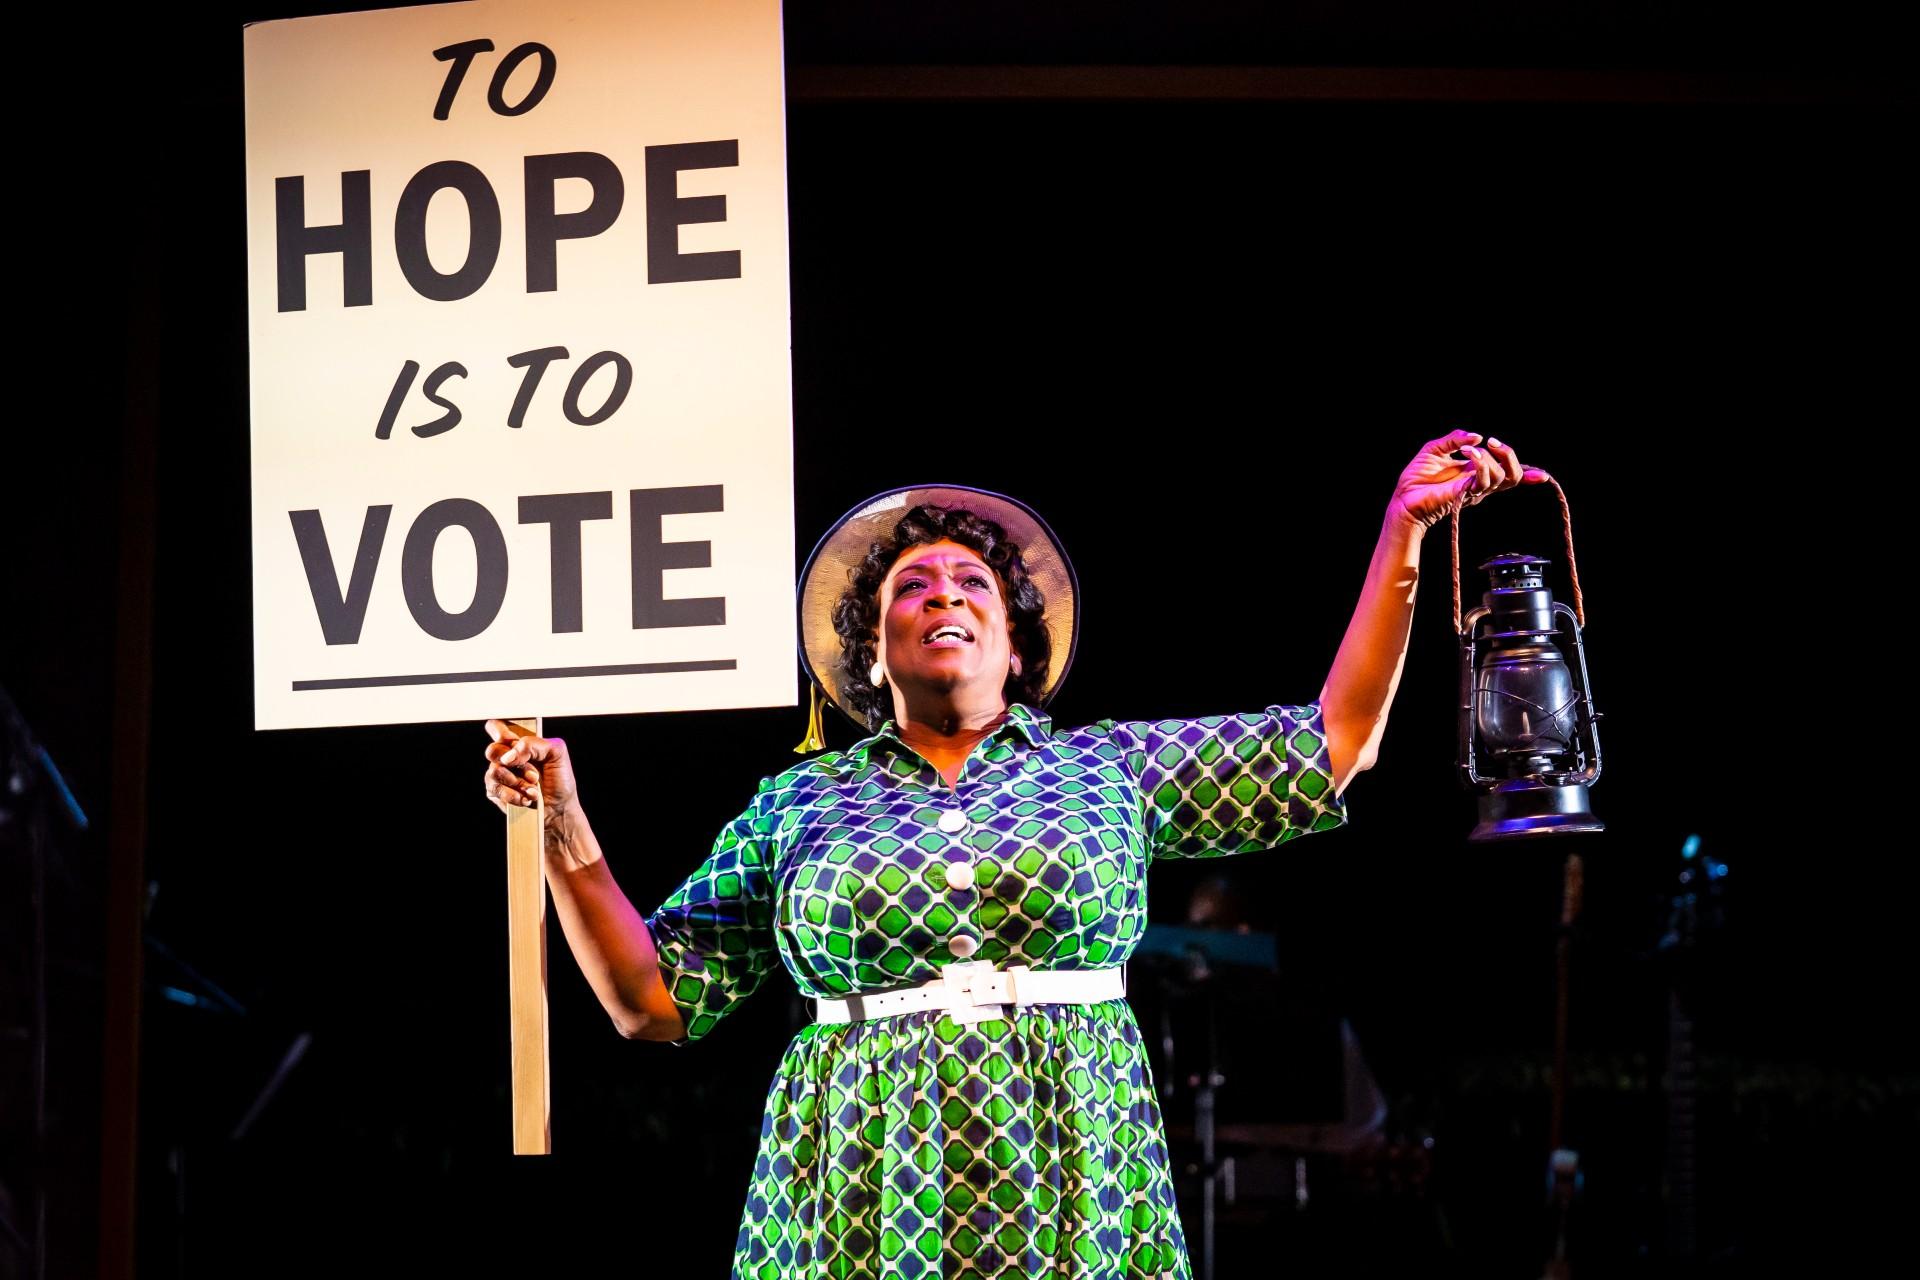 E. Faye Butler (Fannie Lou Hamer) in “Fannie (The Music and Life of Fannie Lou Hamer)” by Cheryl L. West, directed by Henry Godinez at Goodman Theatre, Oct. 15- Nov. 21. (Photo by Liz Lauren)